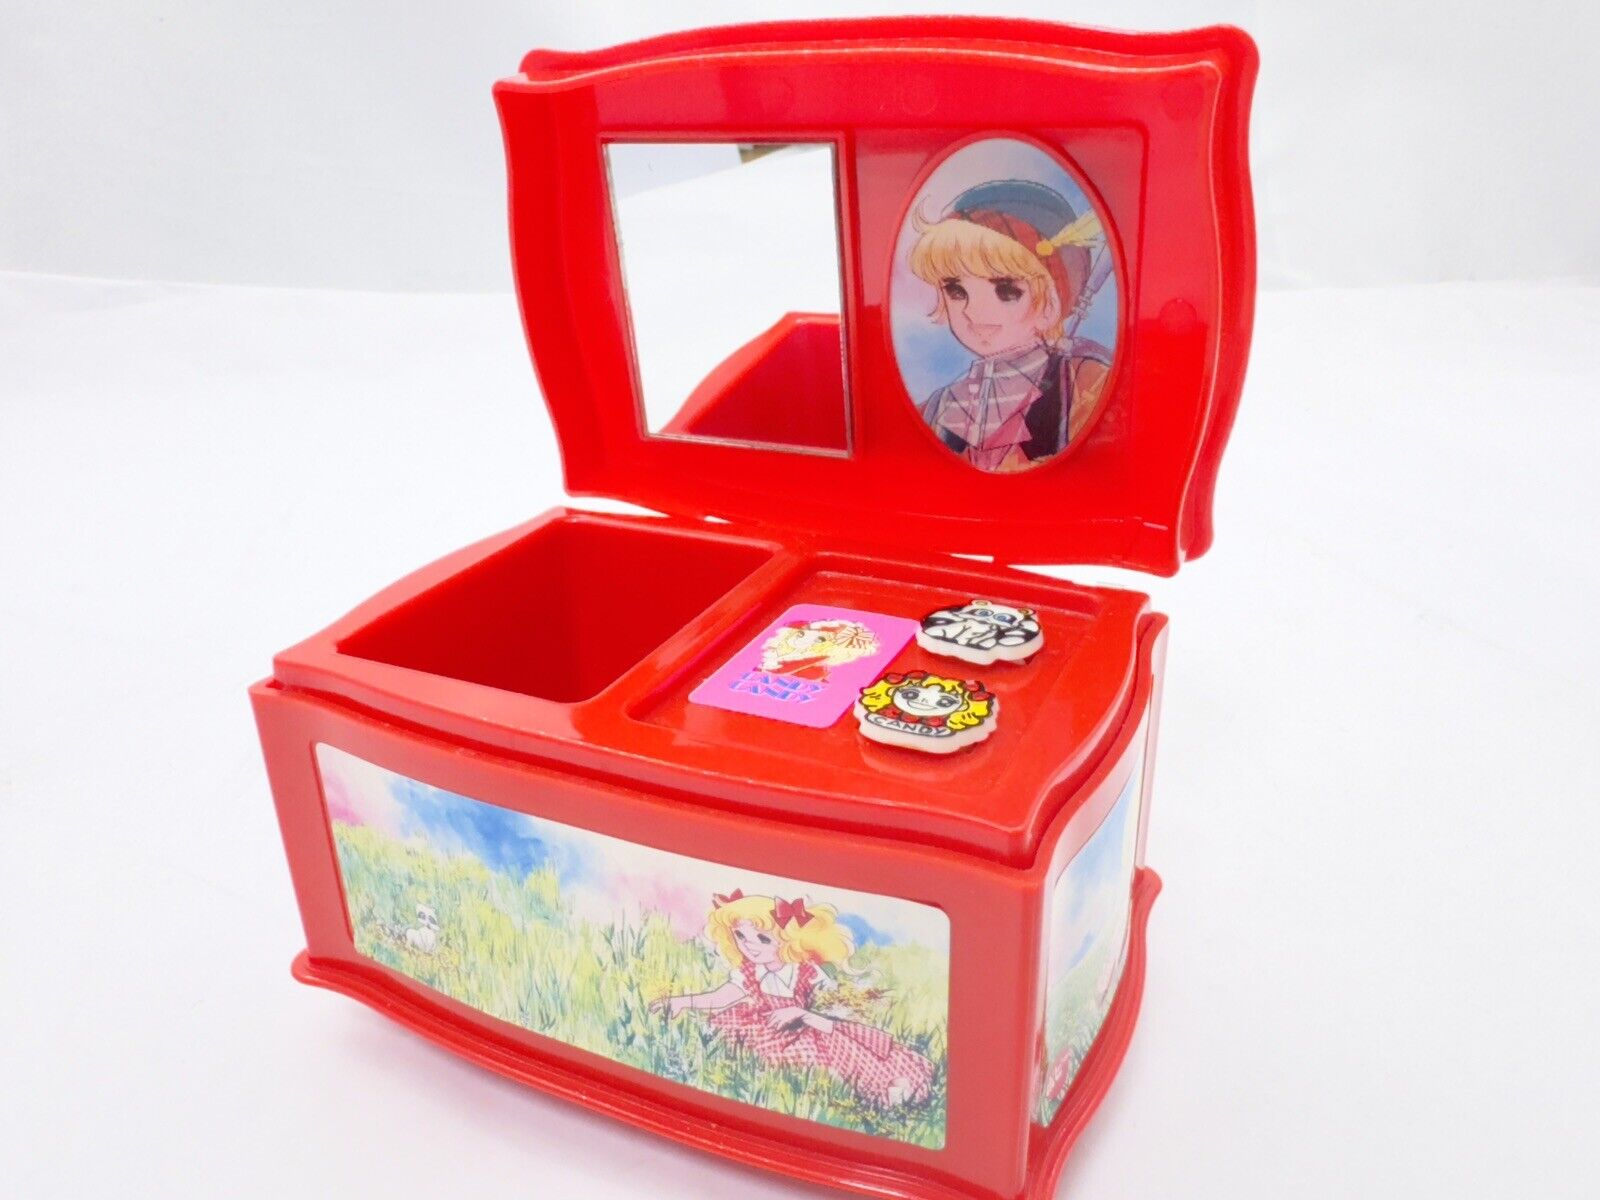 Candy Candy Vintage 1970s Animated Red Music Box with Mirror, Popy Collectible